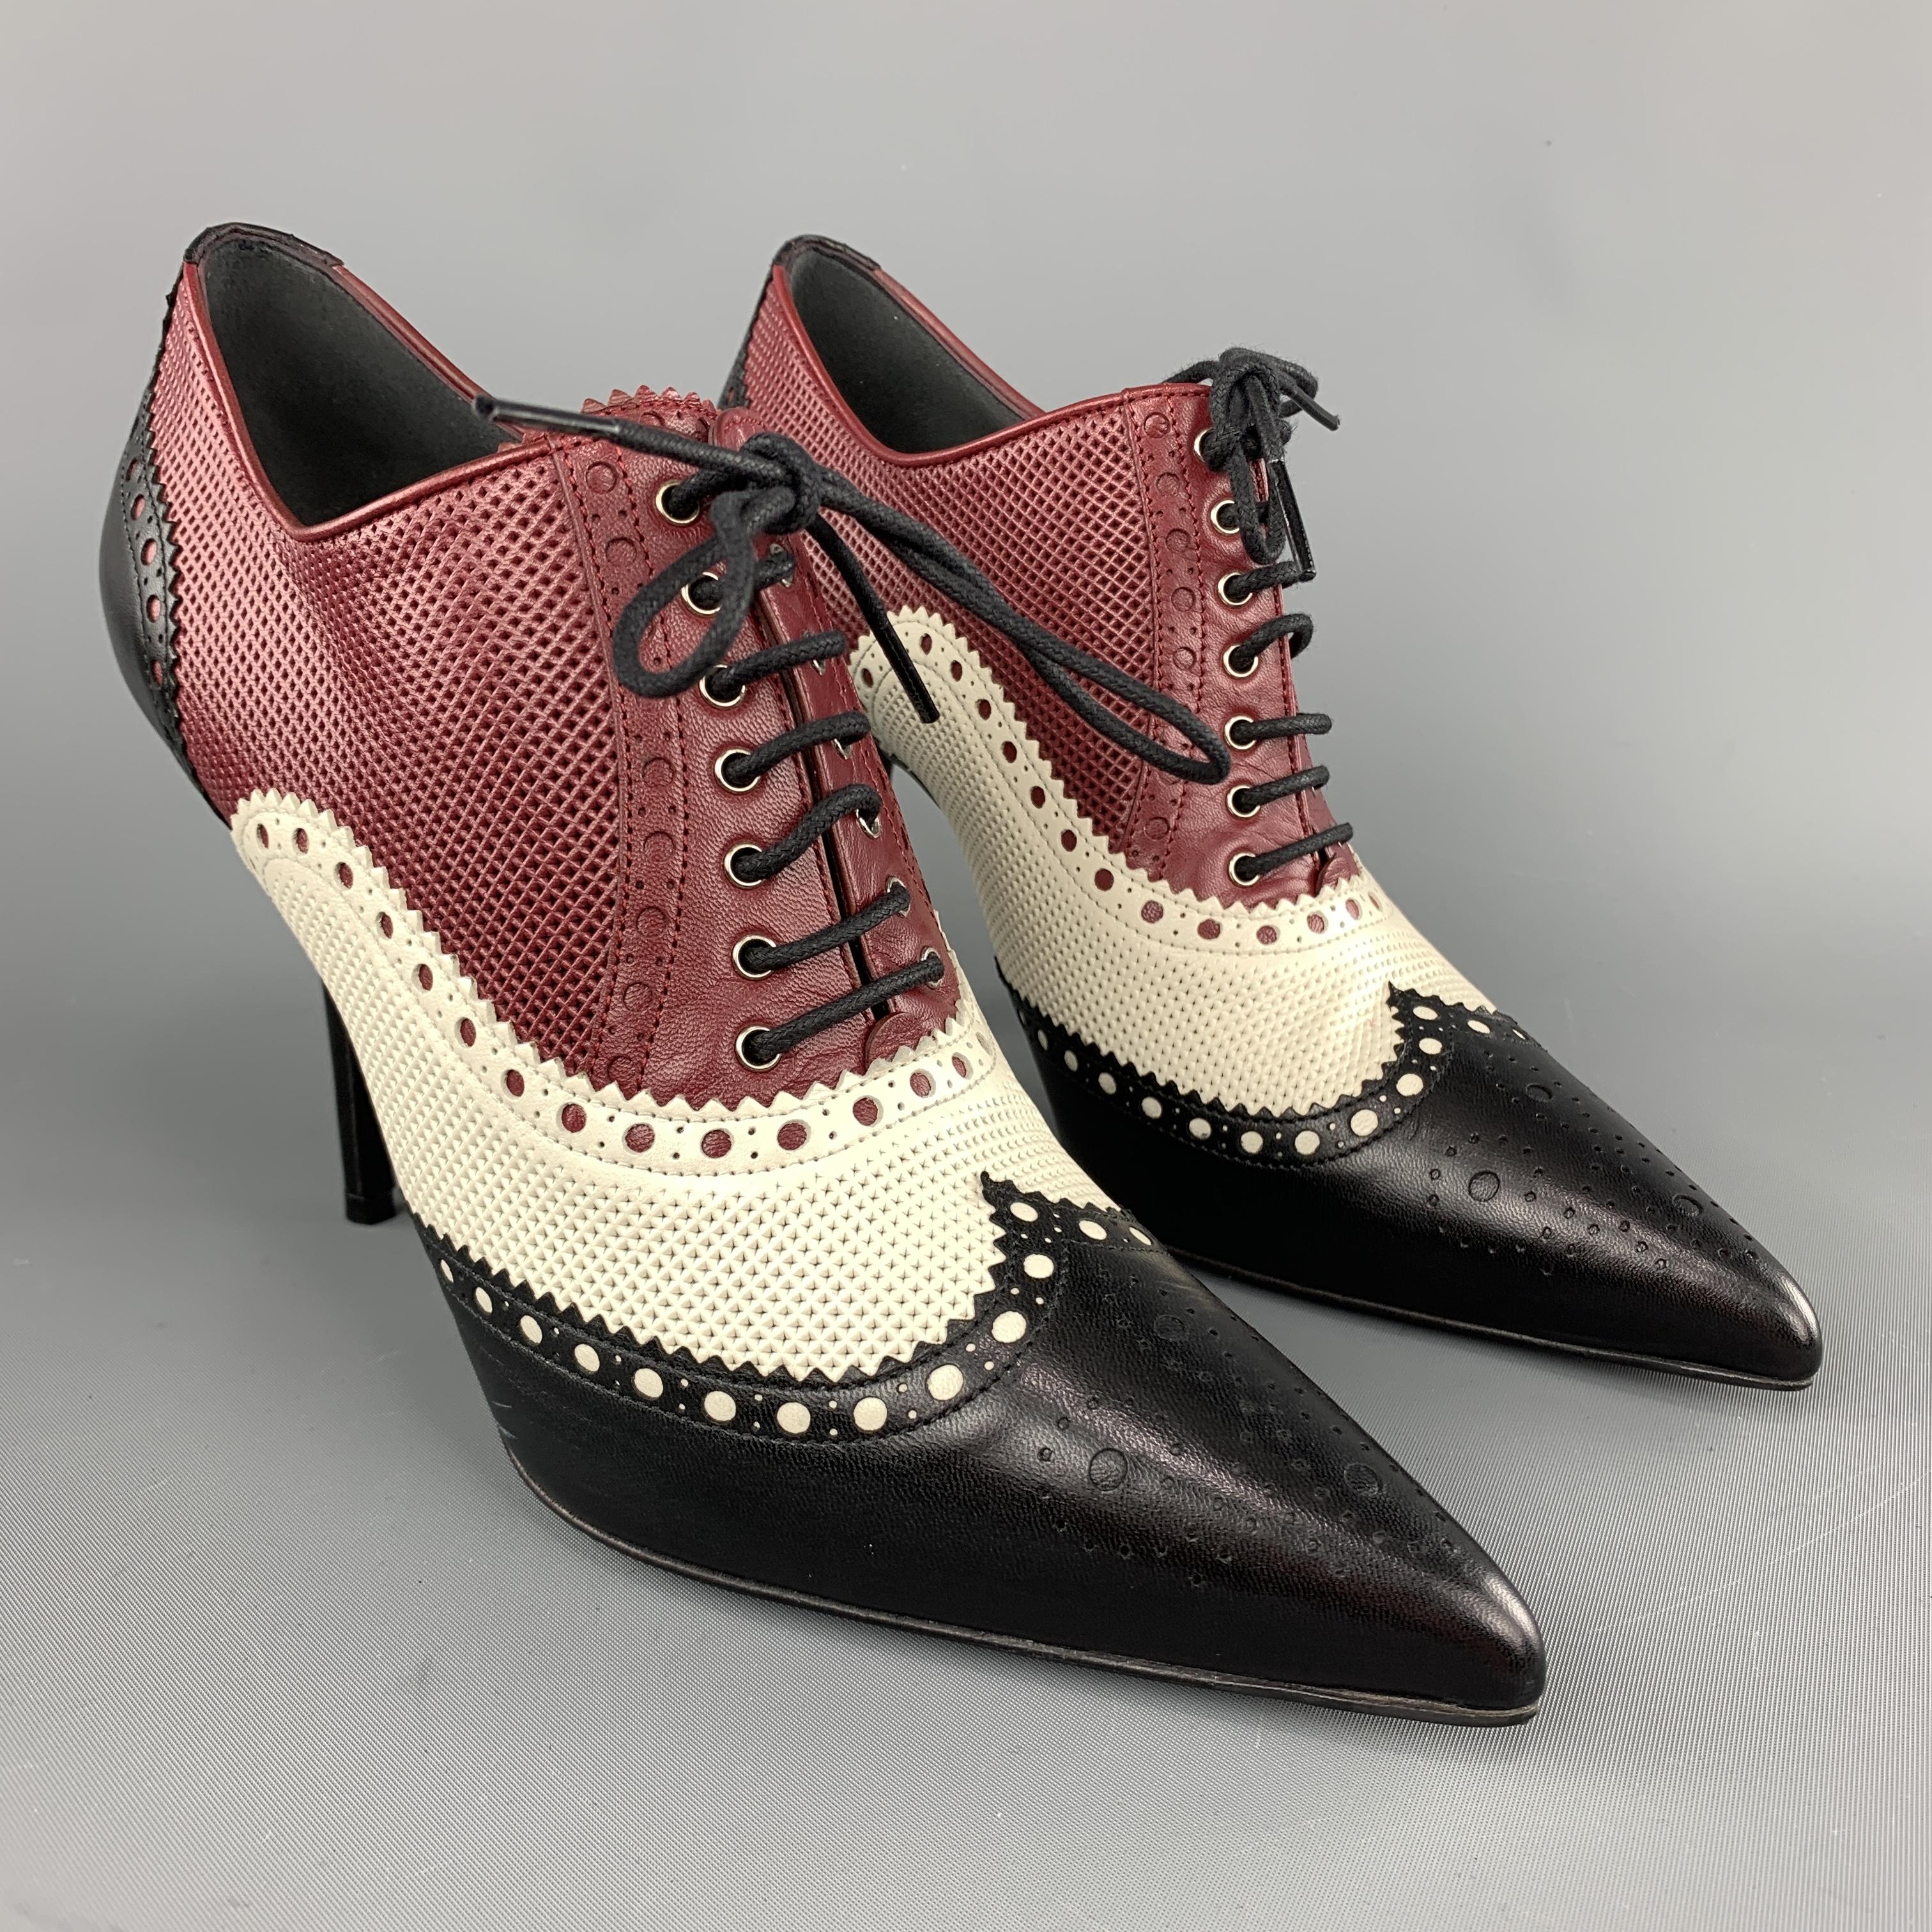 GUCCI oxford booties come in black, burgundy, and cream perforated color block leather with a pointed toe, lace up front, and broguing. Made in Italy.

Excellent Pre-Owned Condition. Retails: $1,100.00.
Marked: IT 38